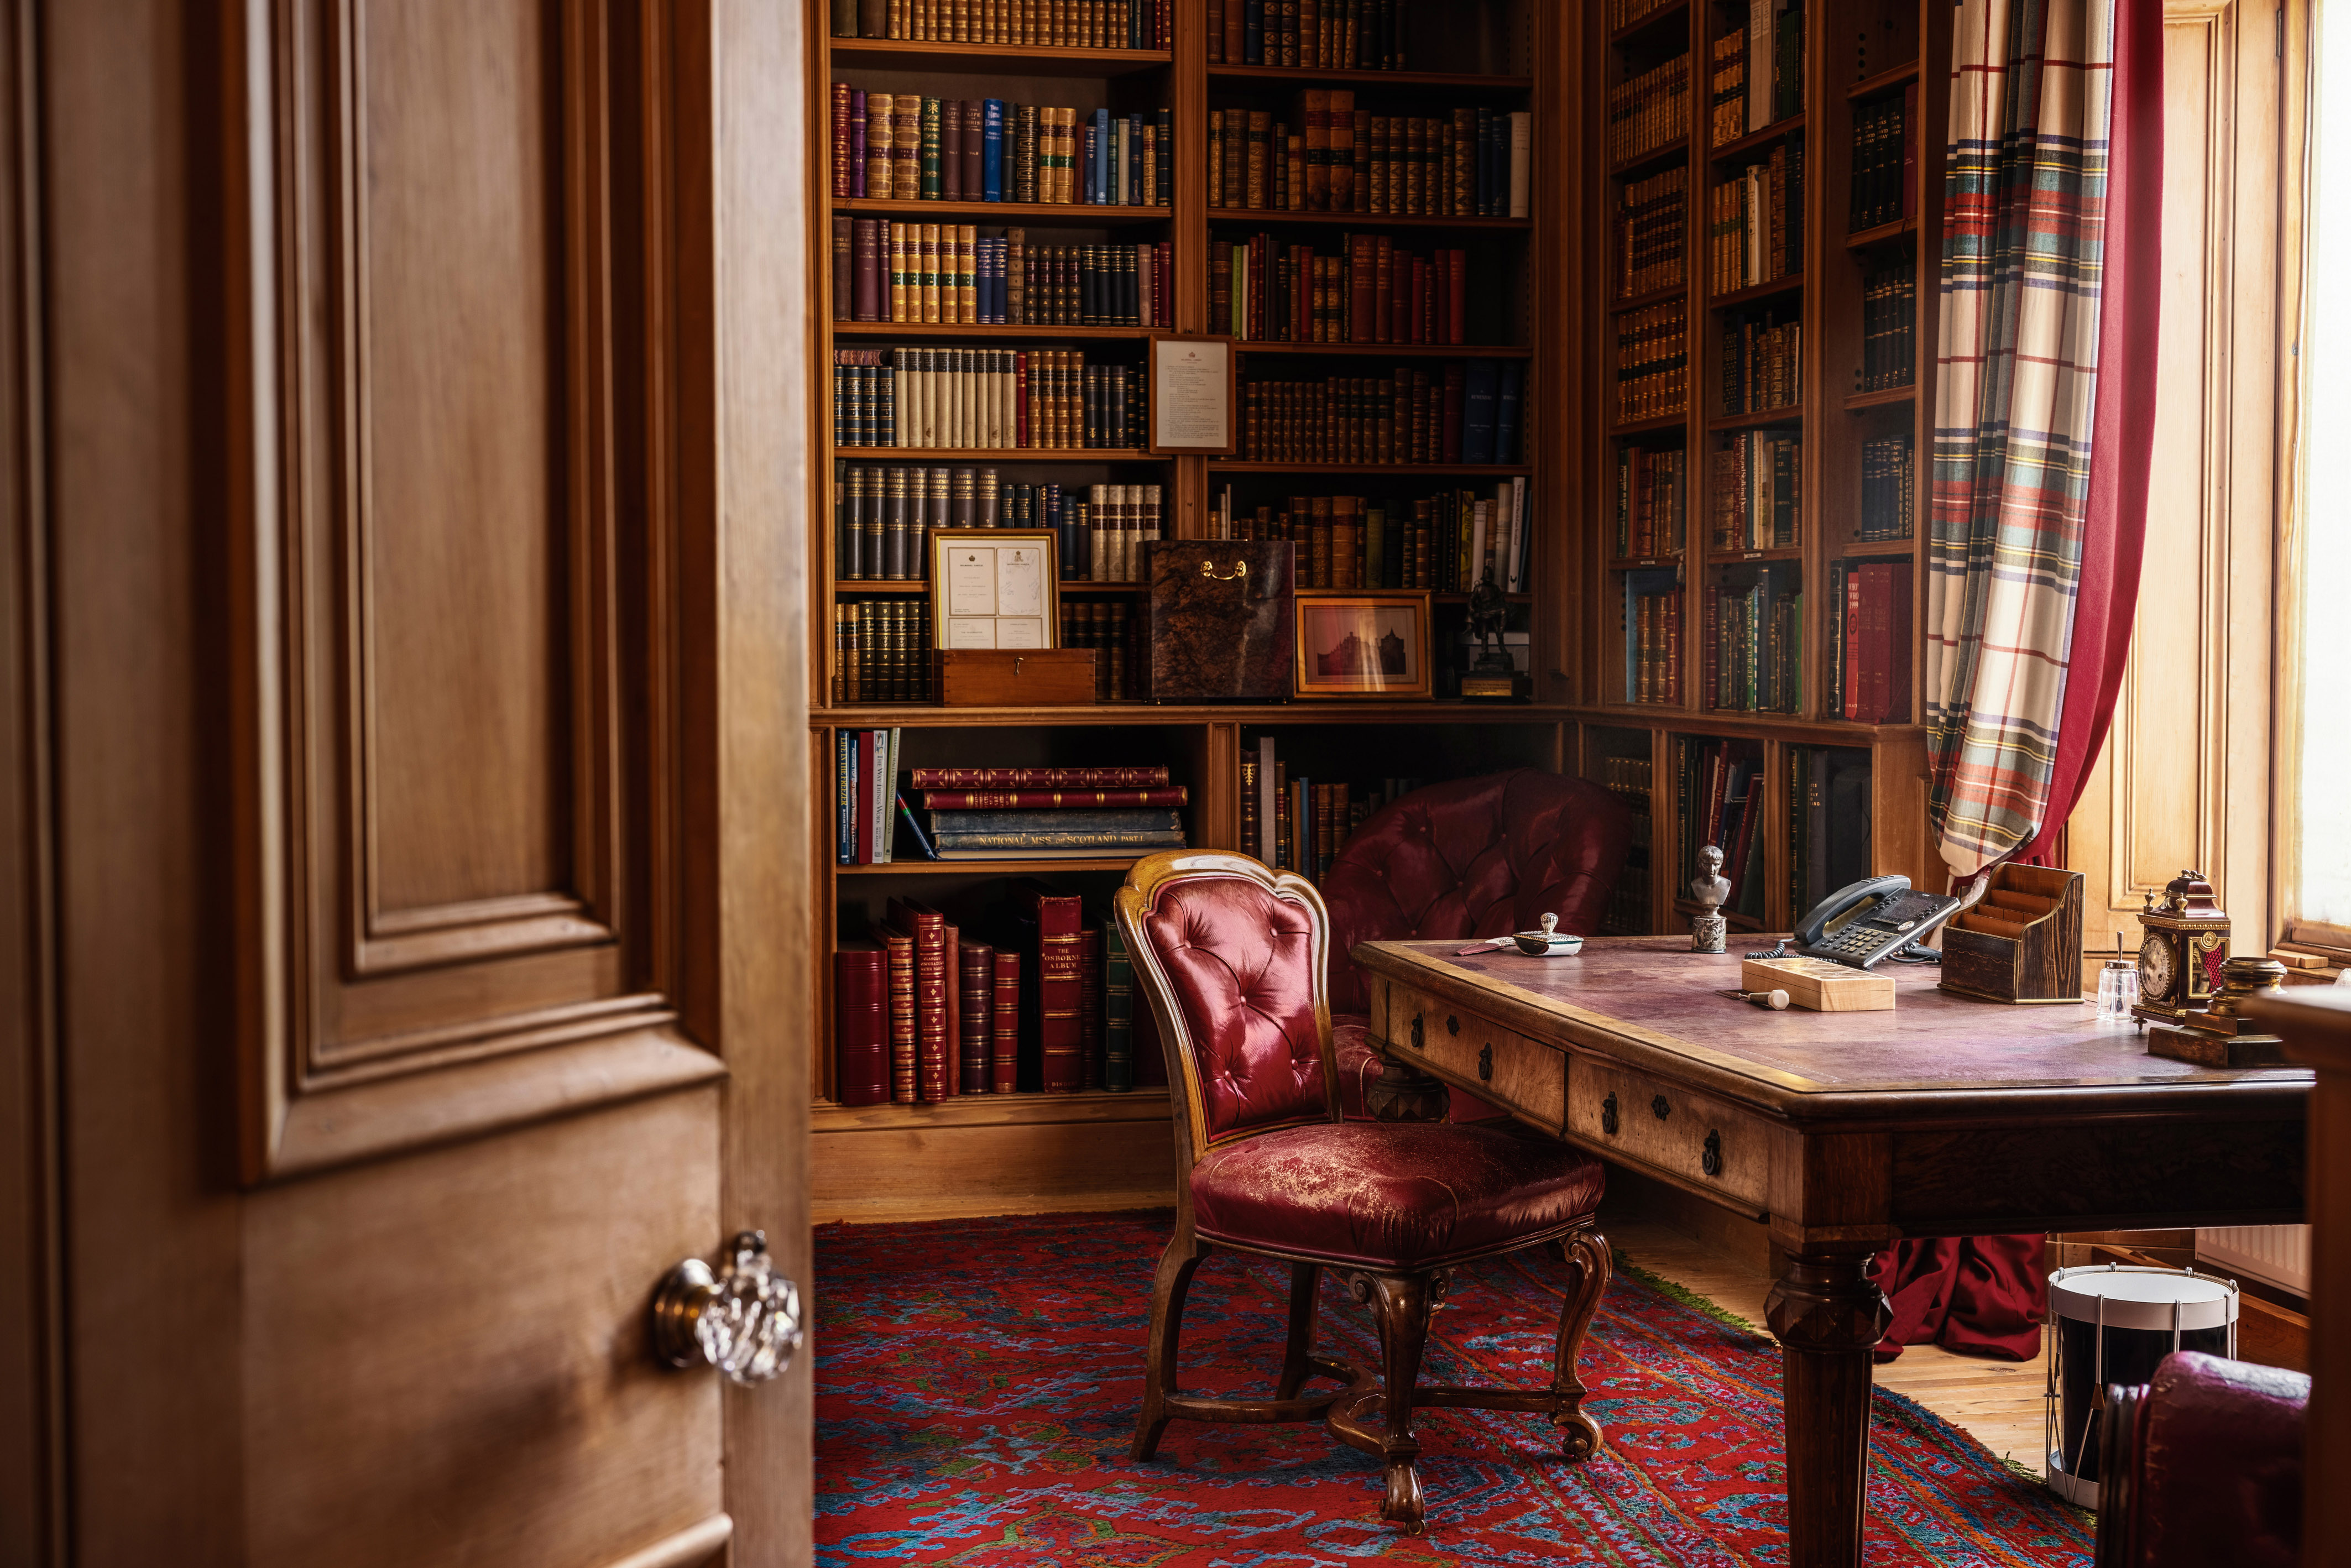 An open door reveals a chair at a desk with books on shelves in Balmoral's library